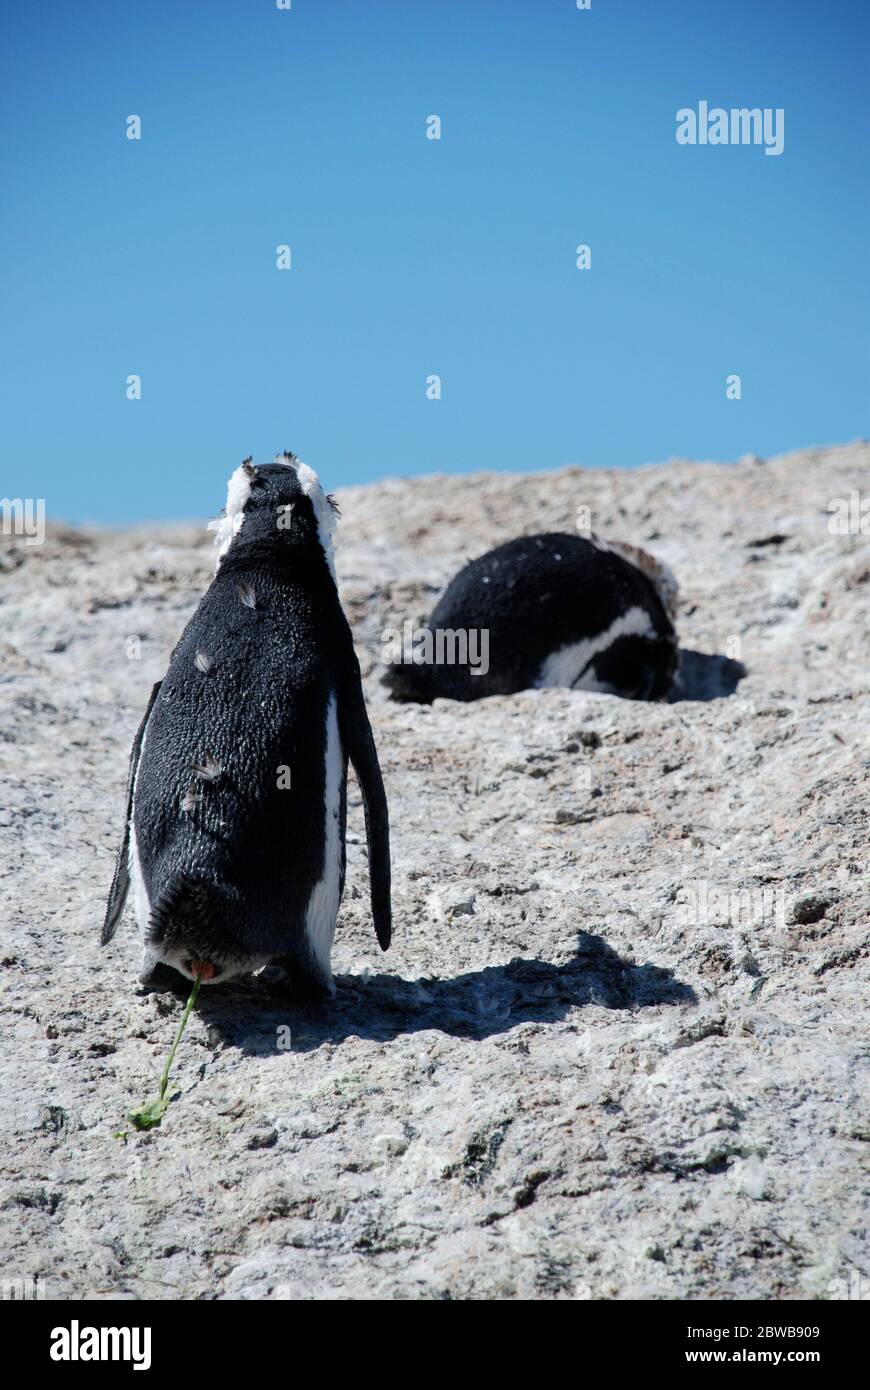 Two African Penguins (Spheniscus demersus) photographed from the back. One penguin is defecating. Stock Photo